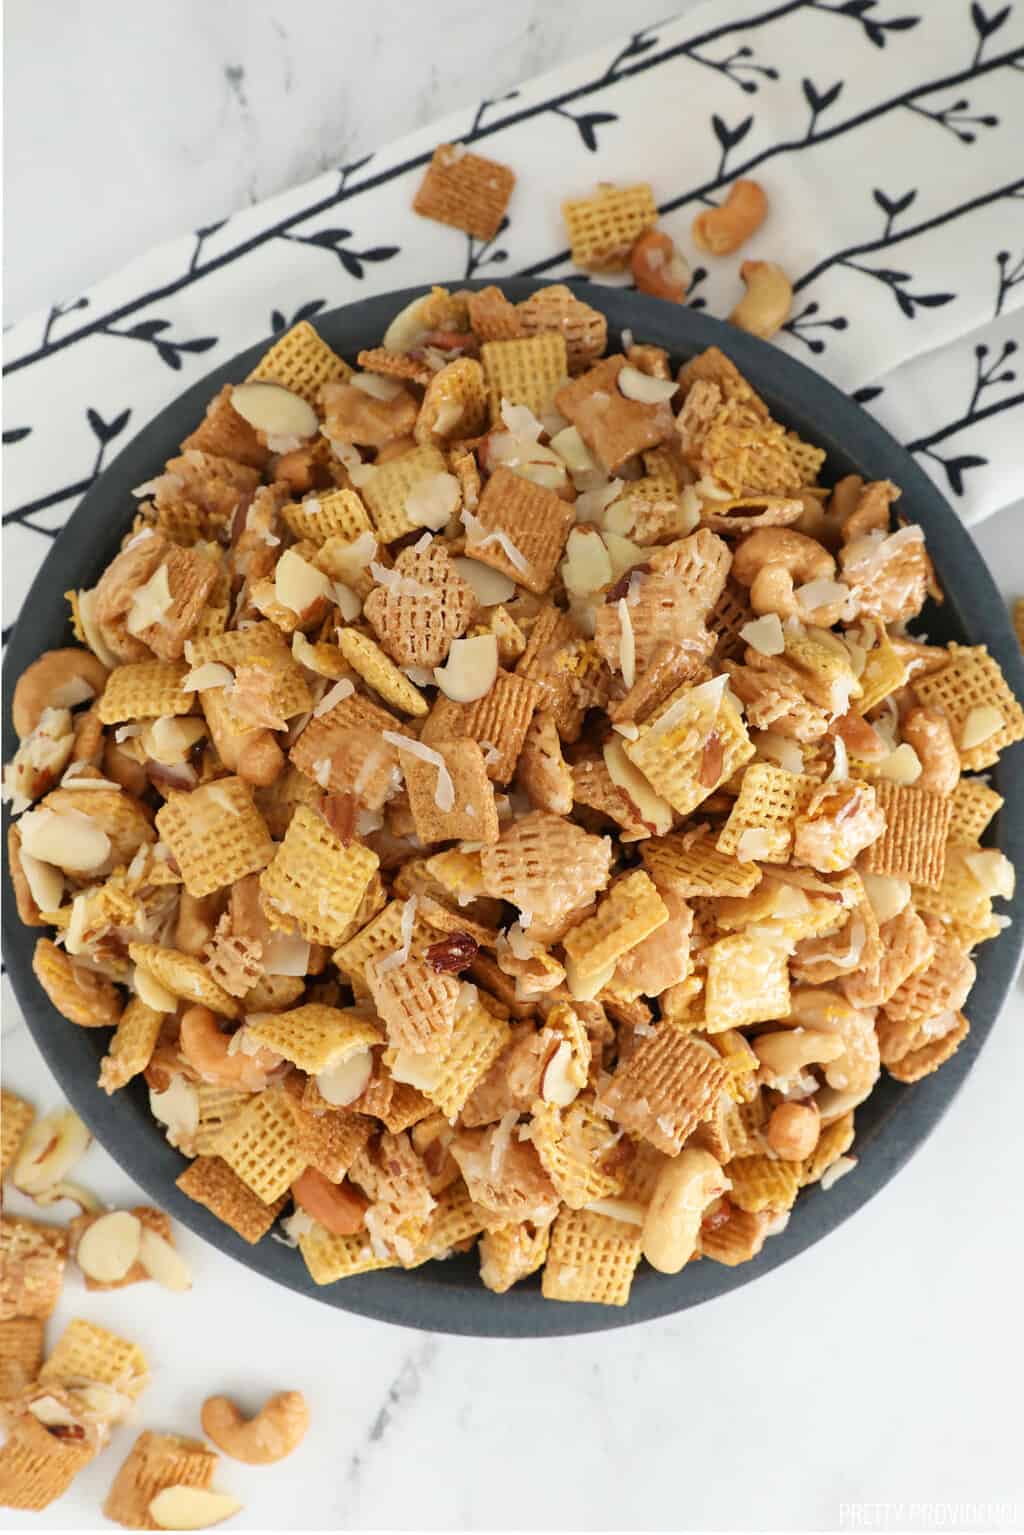 Close up of Sweet Chex mix with cashews, coconut, almonds with sticky caramel coating in a dark blue bowl.